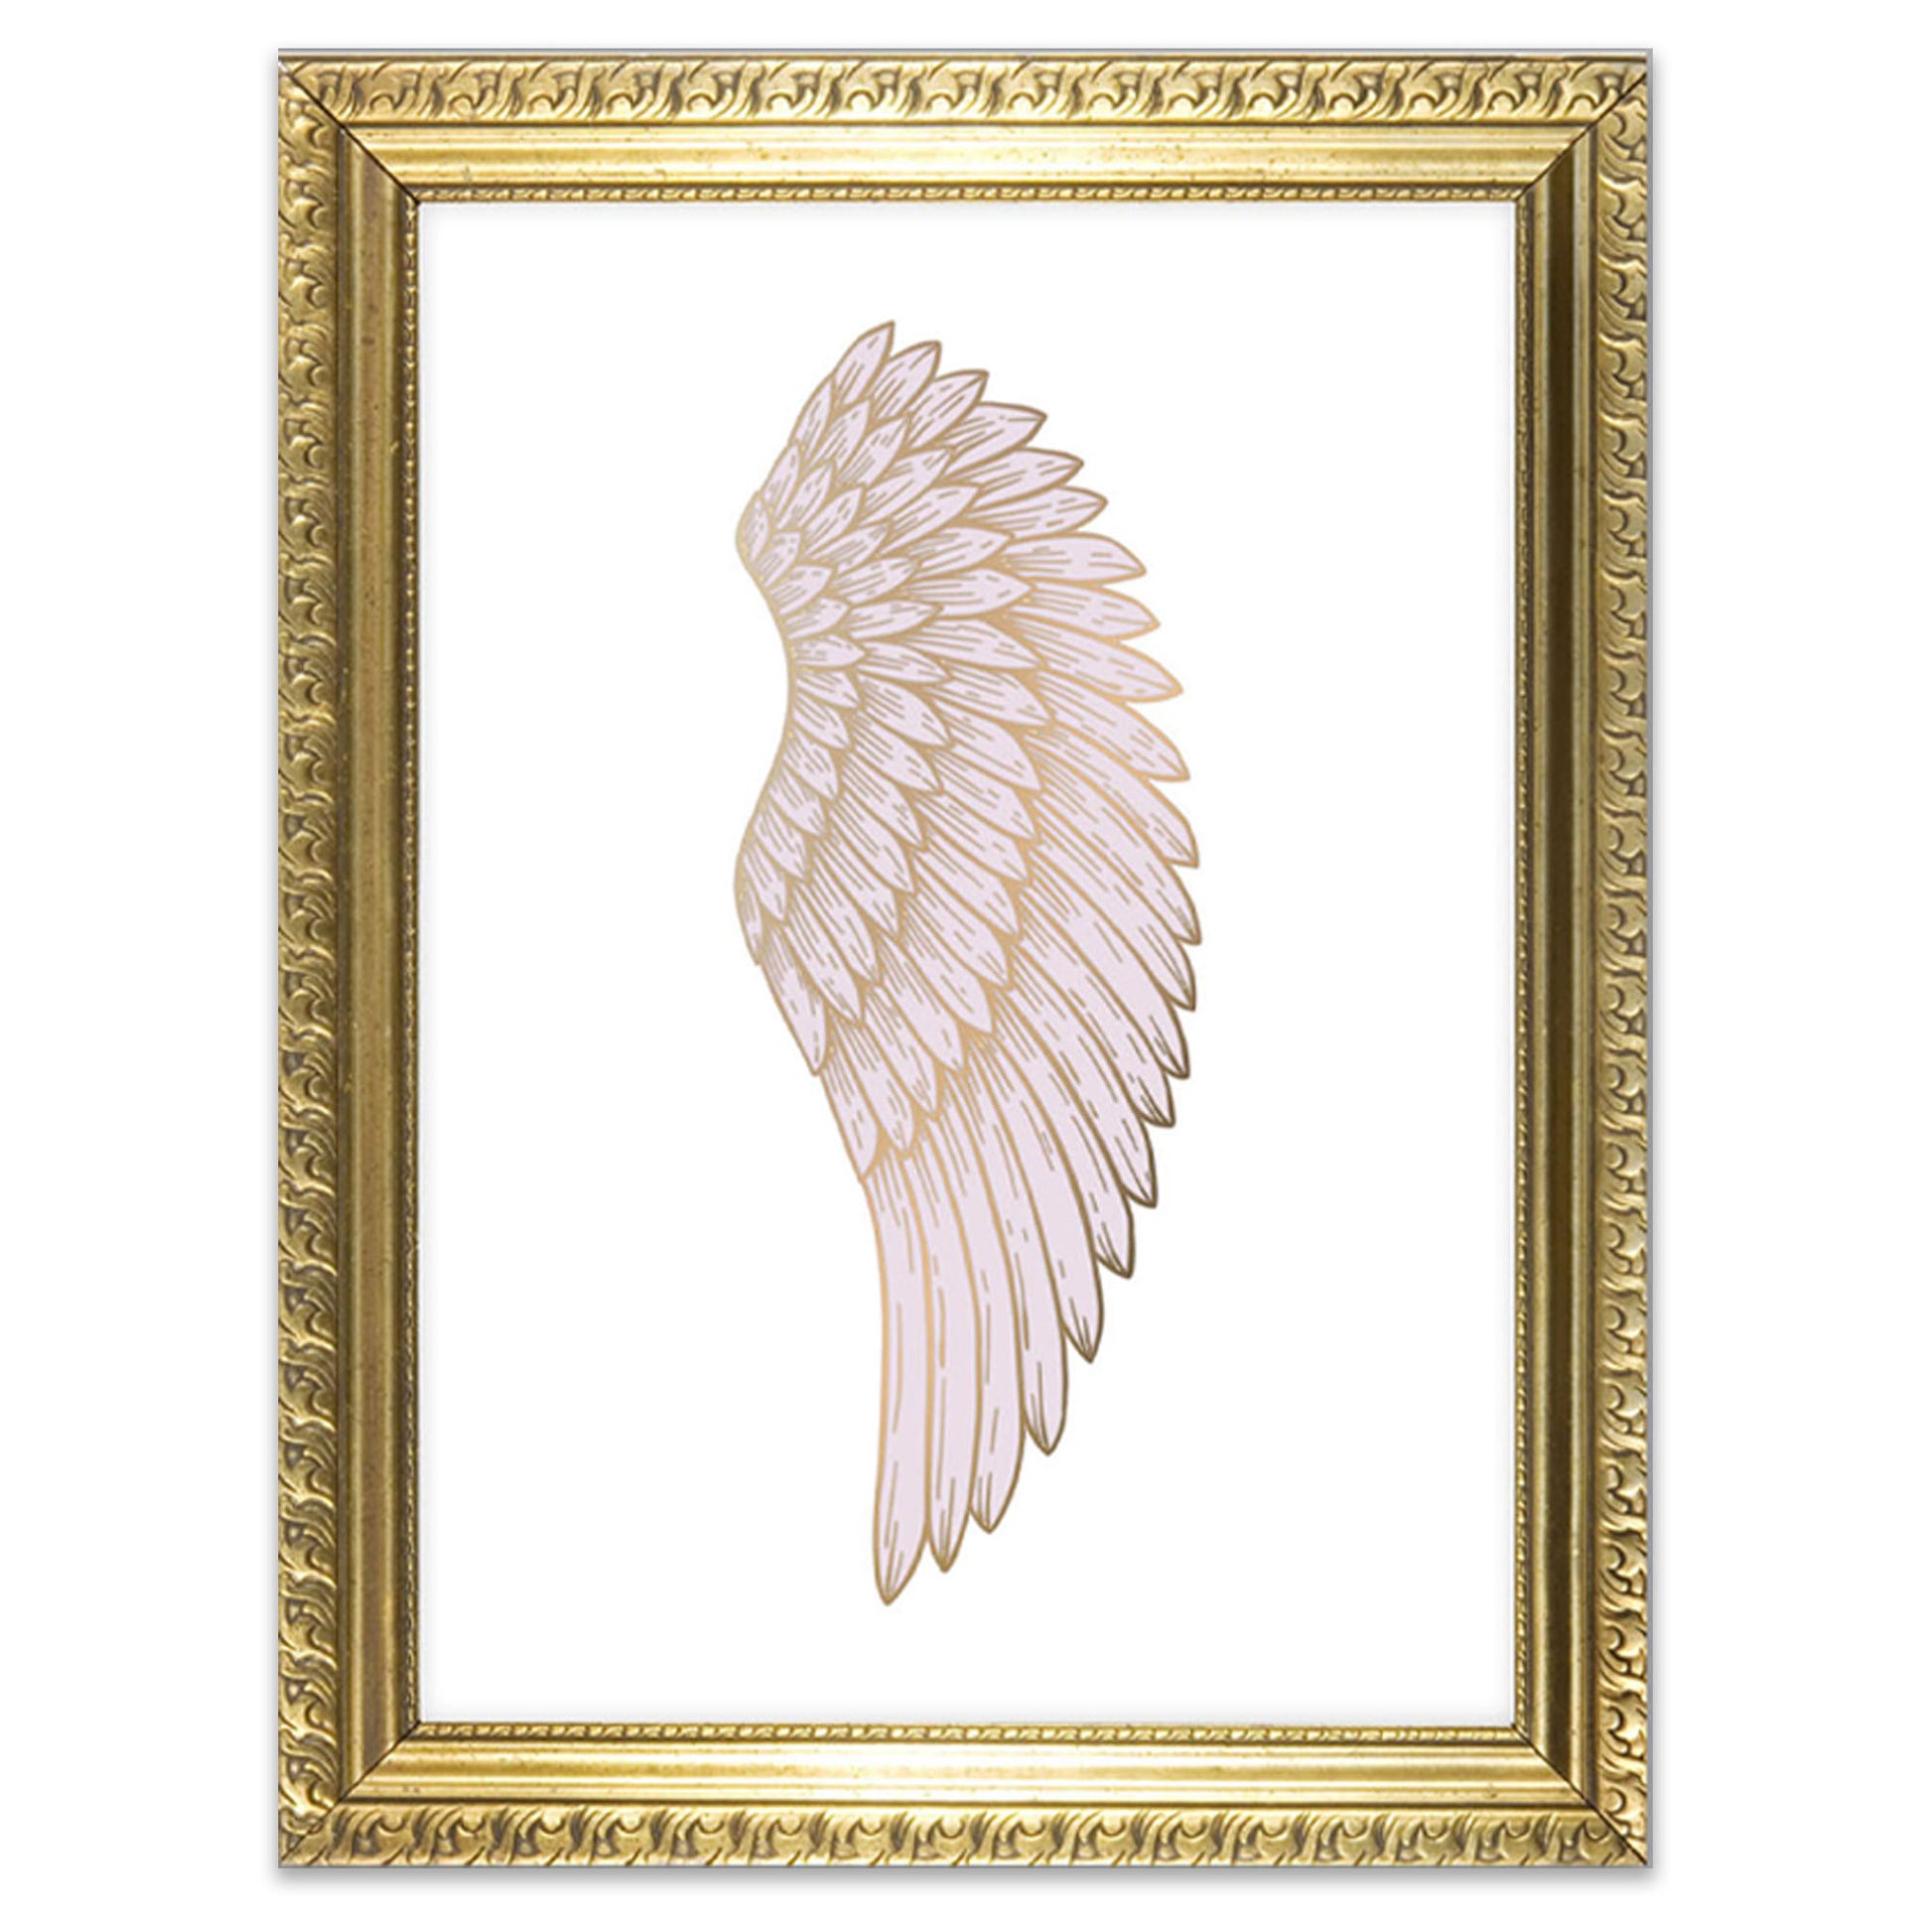 Girls pink & gold bedroom angel wing art posters